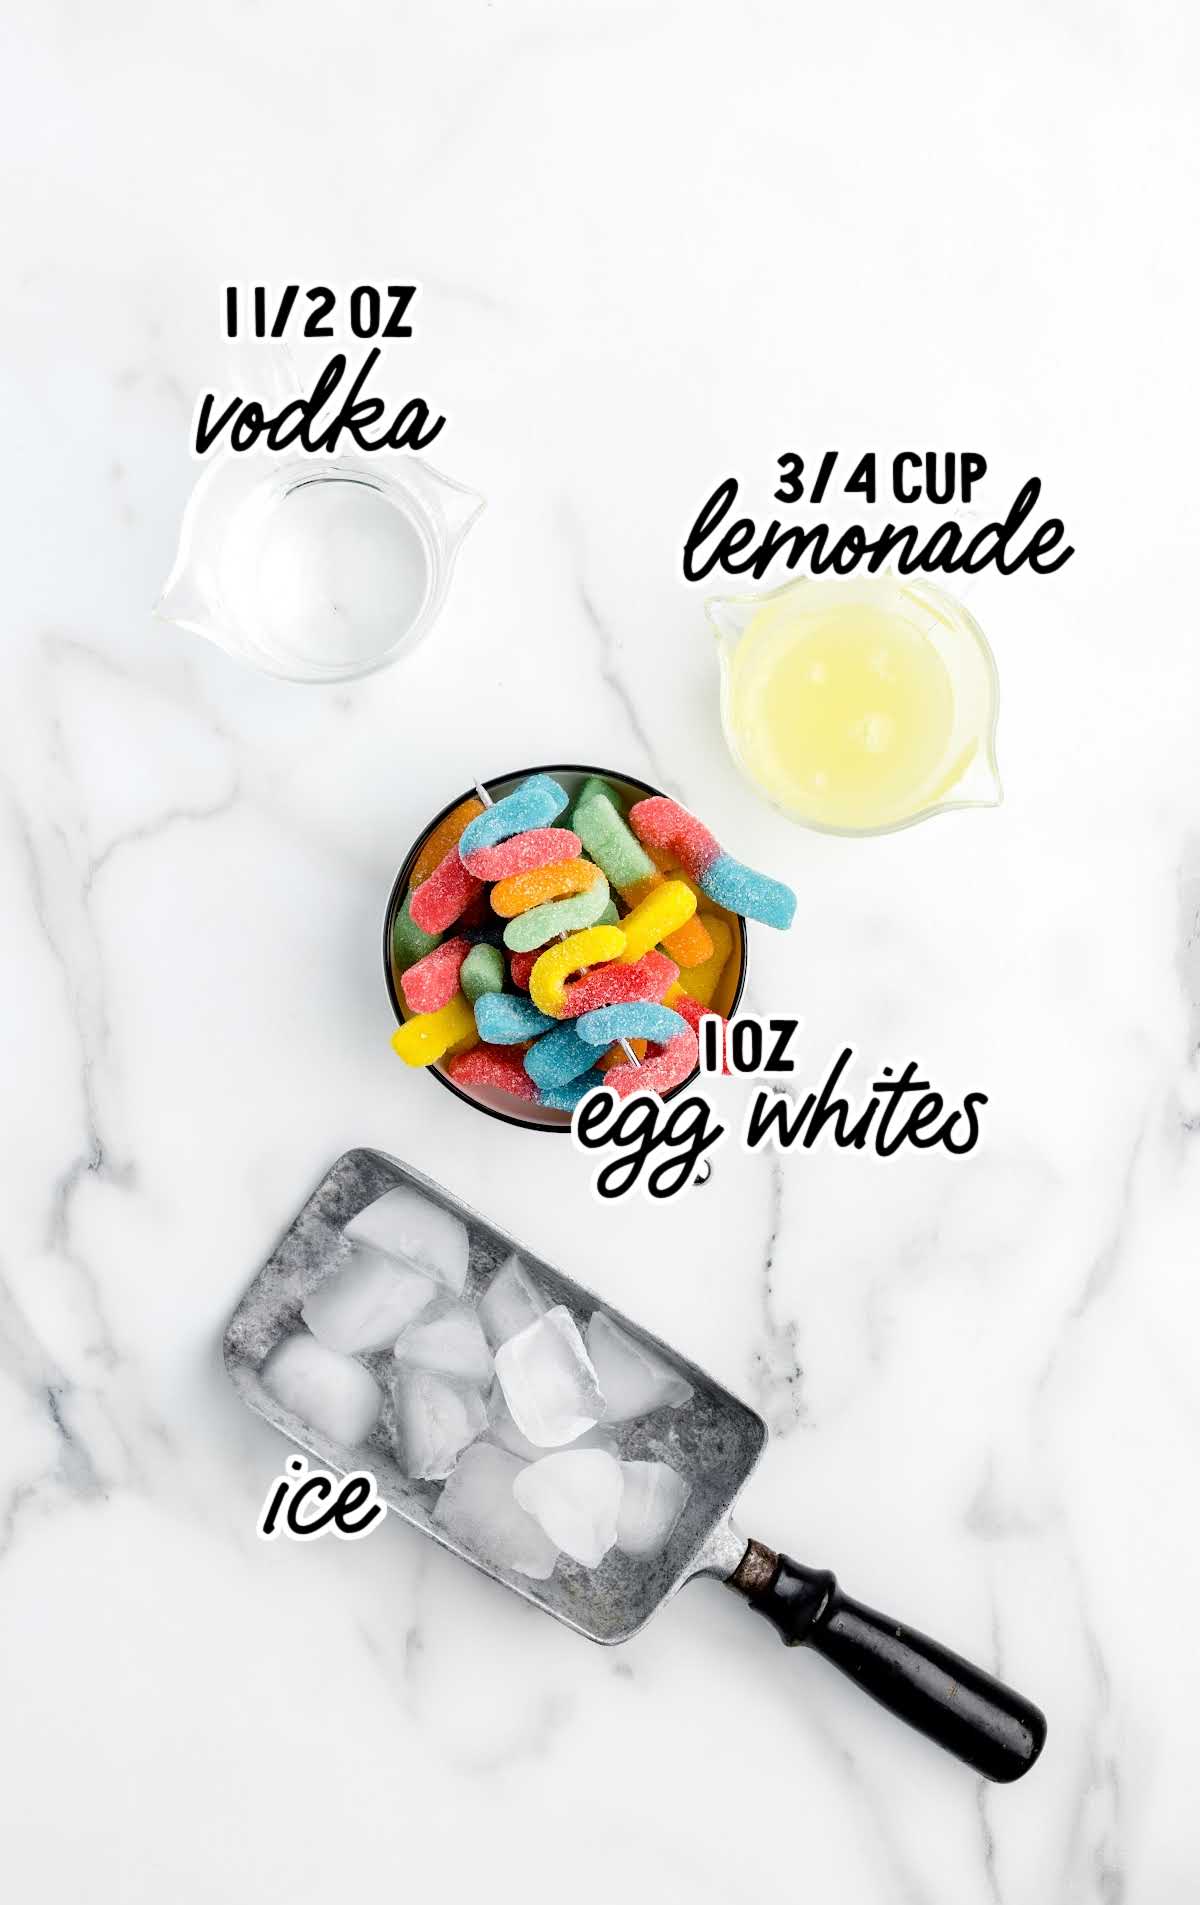 vodka sour raw ingredients that are labeled